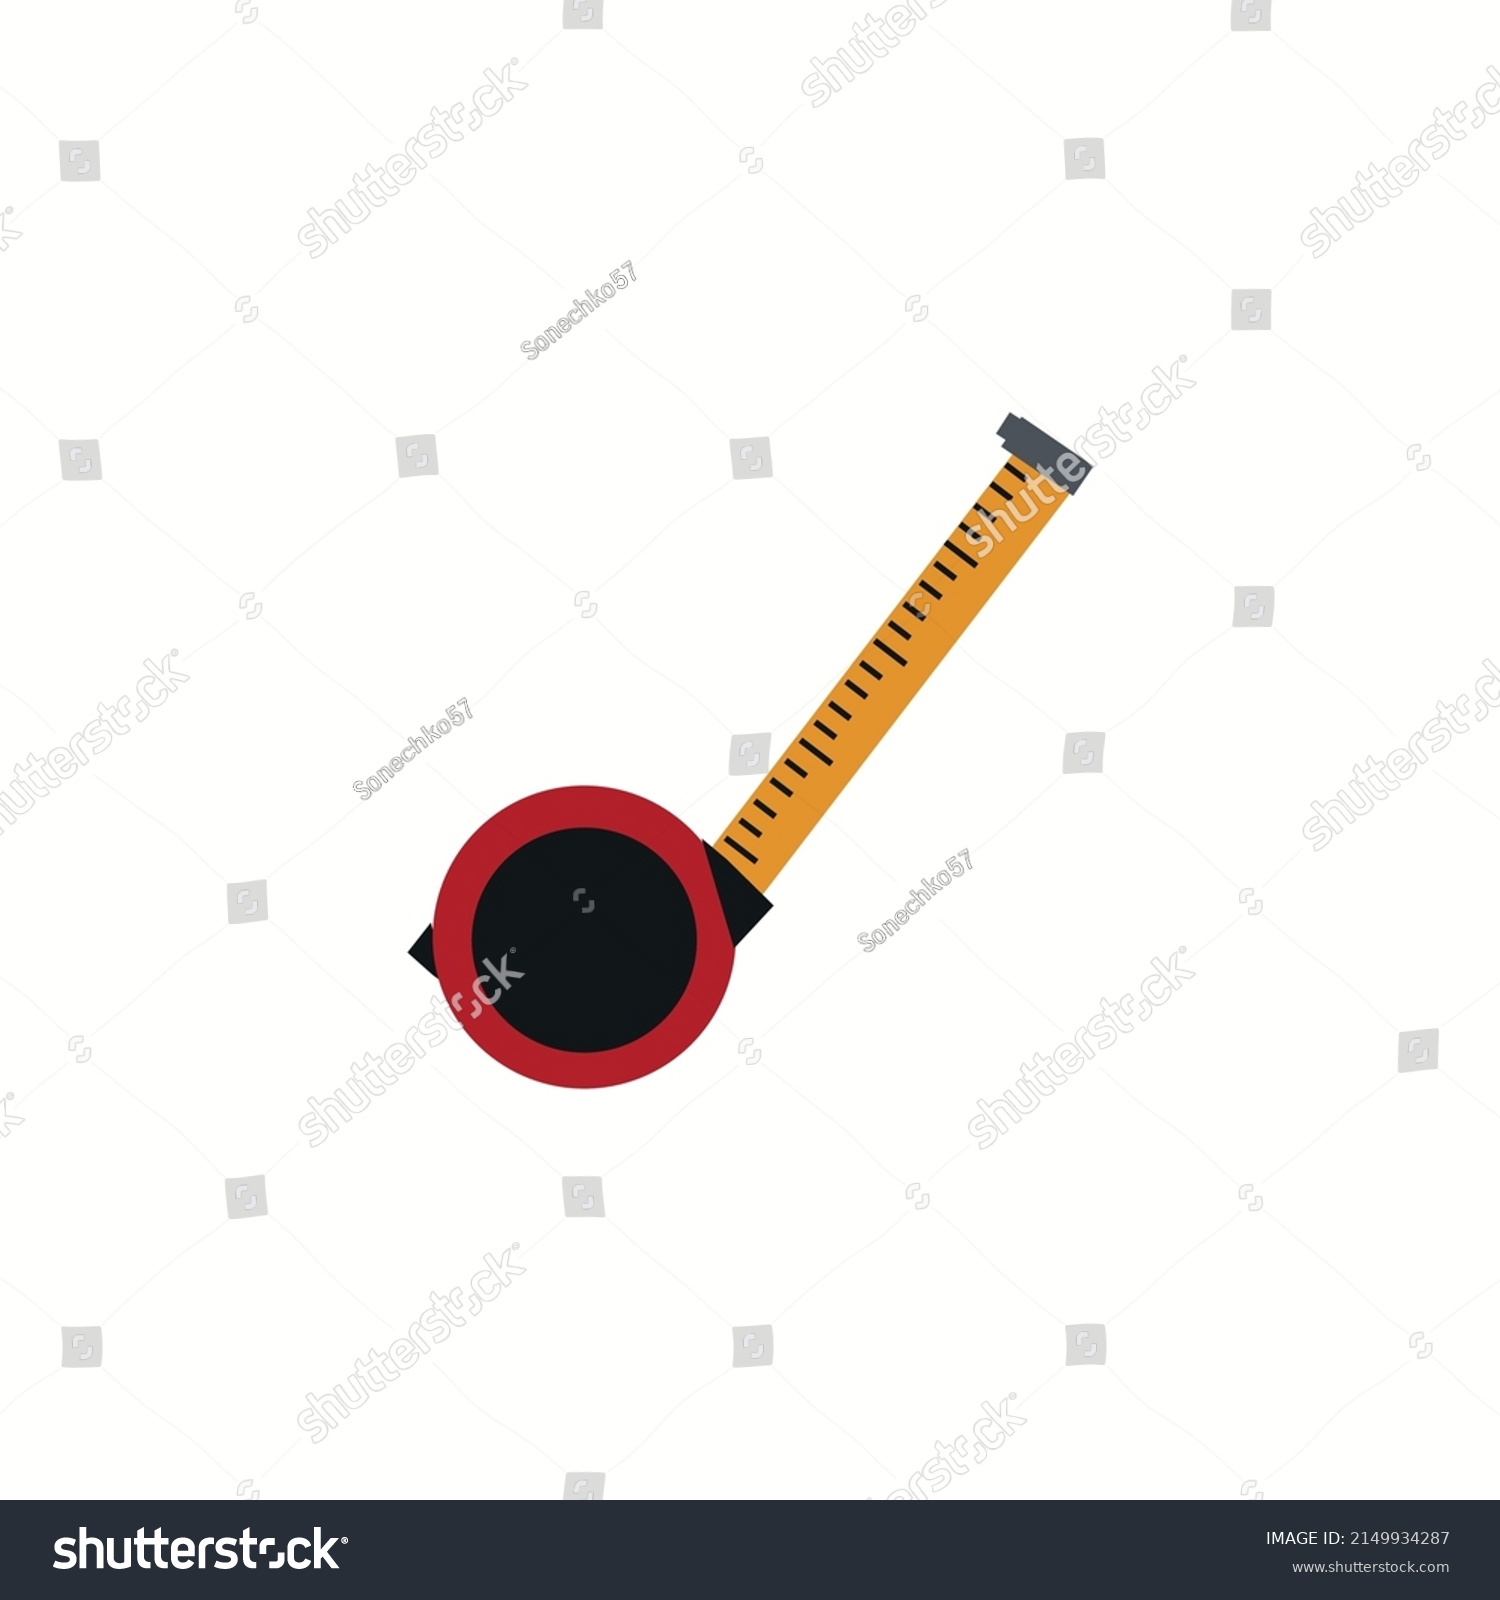 Simple Tape Measure Tool Vector Illustration Stock Vector (Royalty Free ...